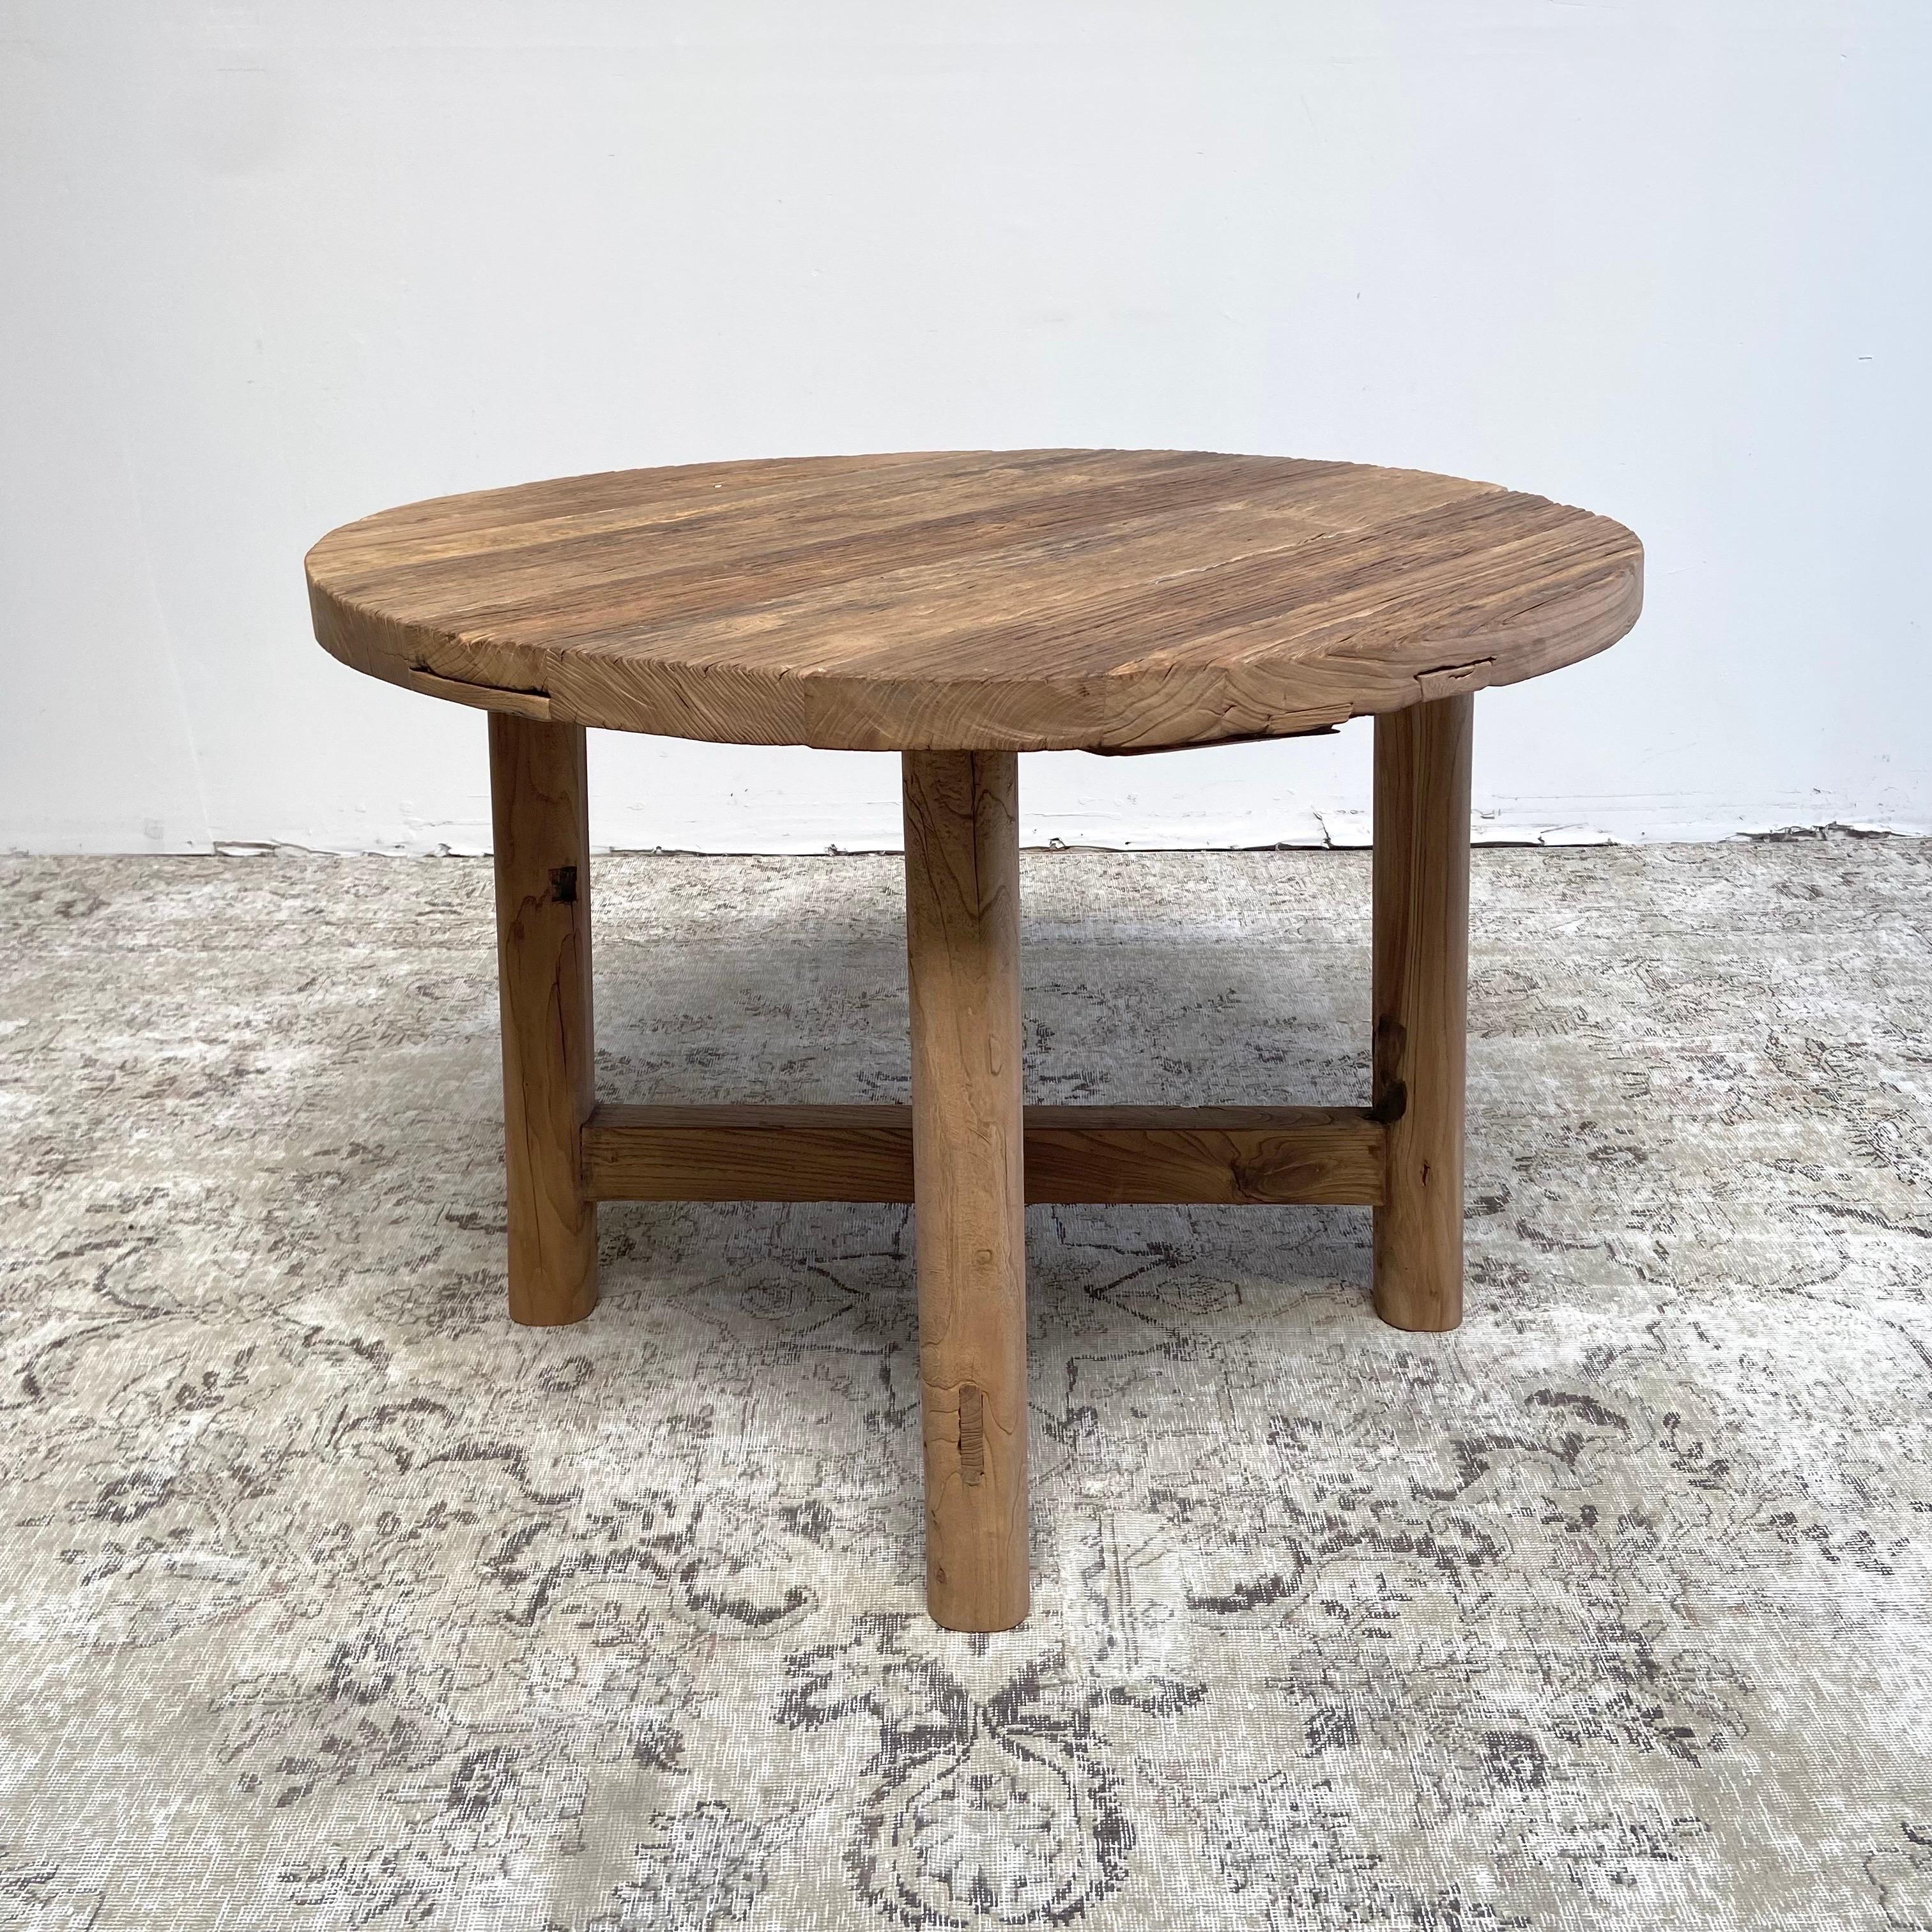 Part of the bloom home inc collection, this beautiful reclaimed elm wood table is made from solid vintage elm timbers. The unique thing about this X base table is that it is constructed without hardware, each piece is dowel and joined by the base